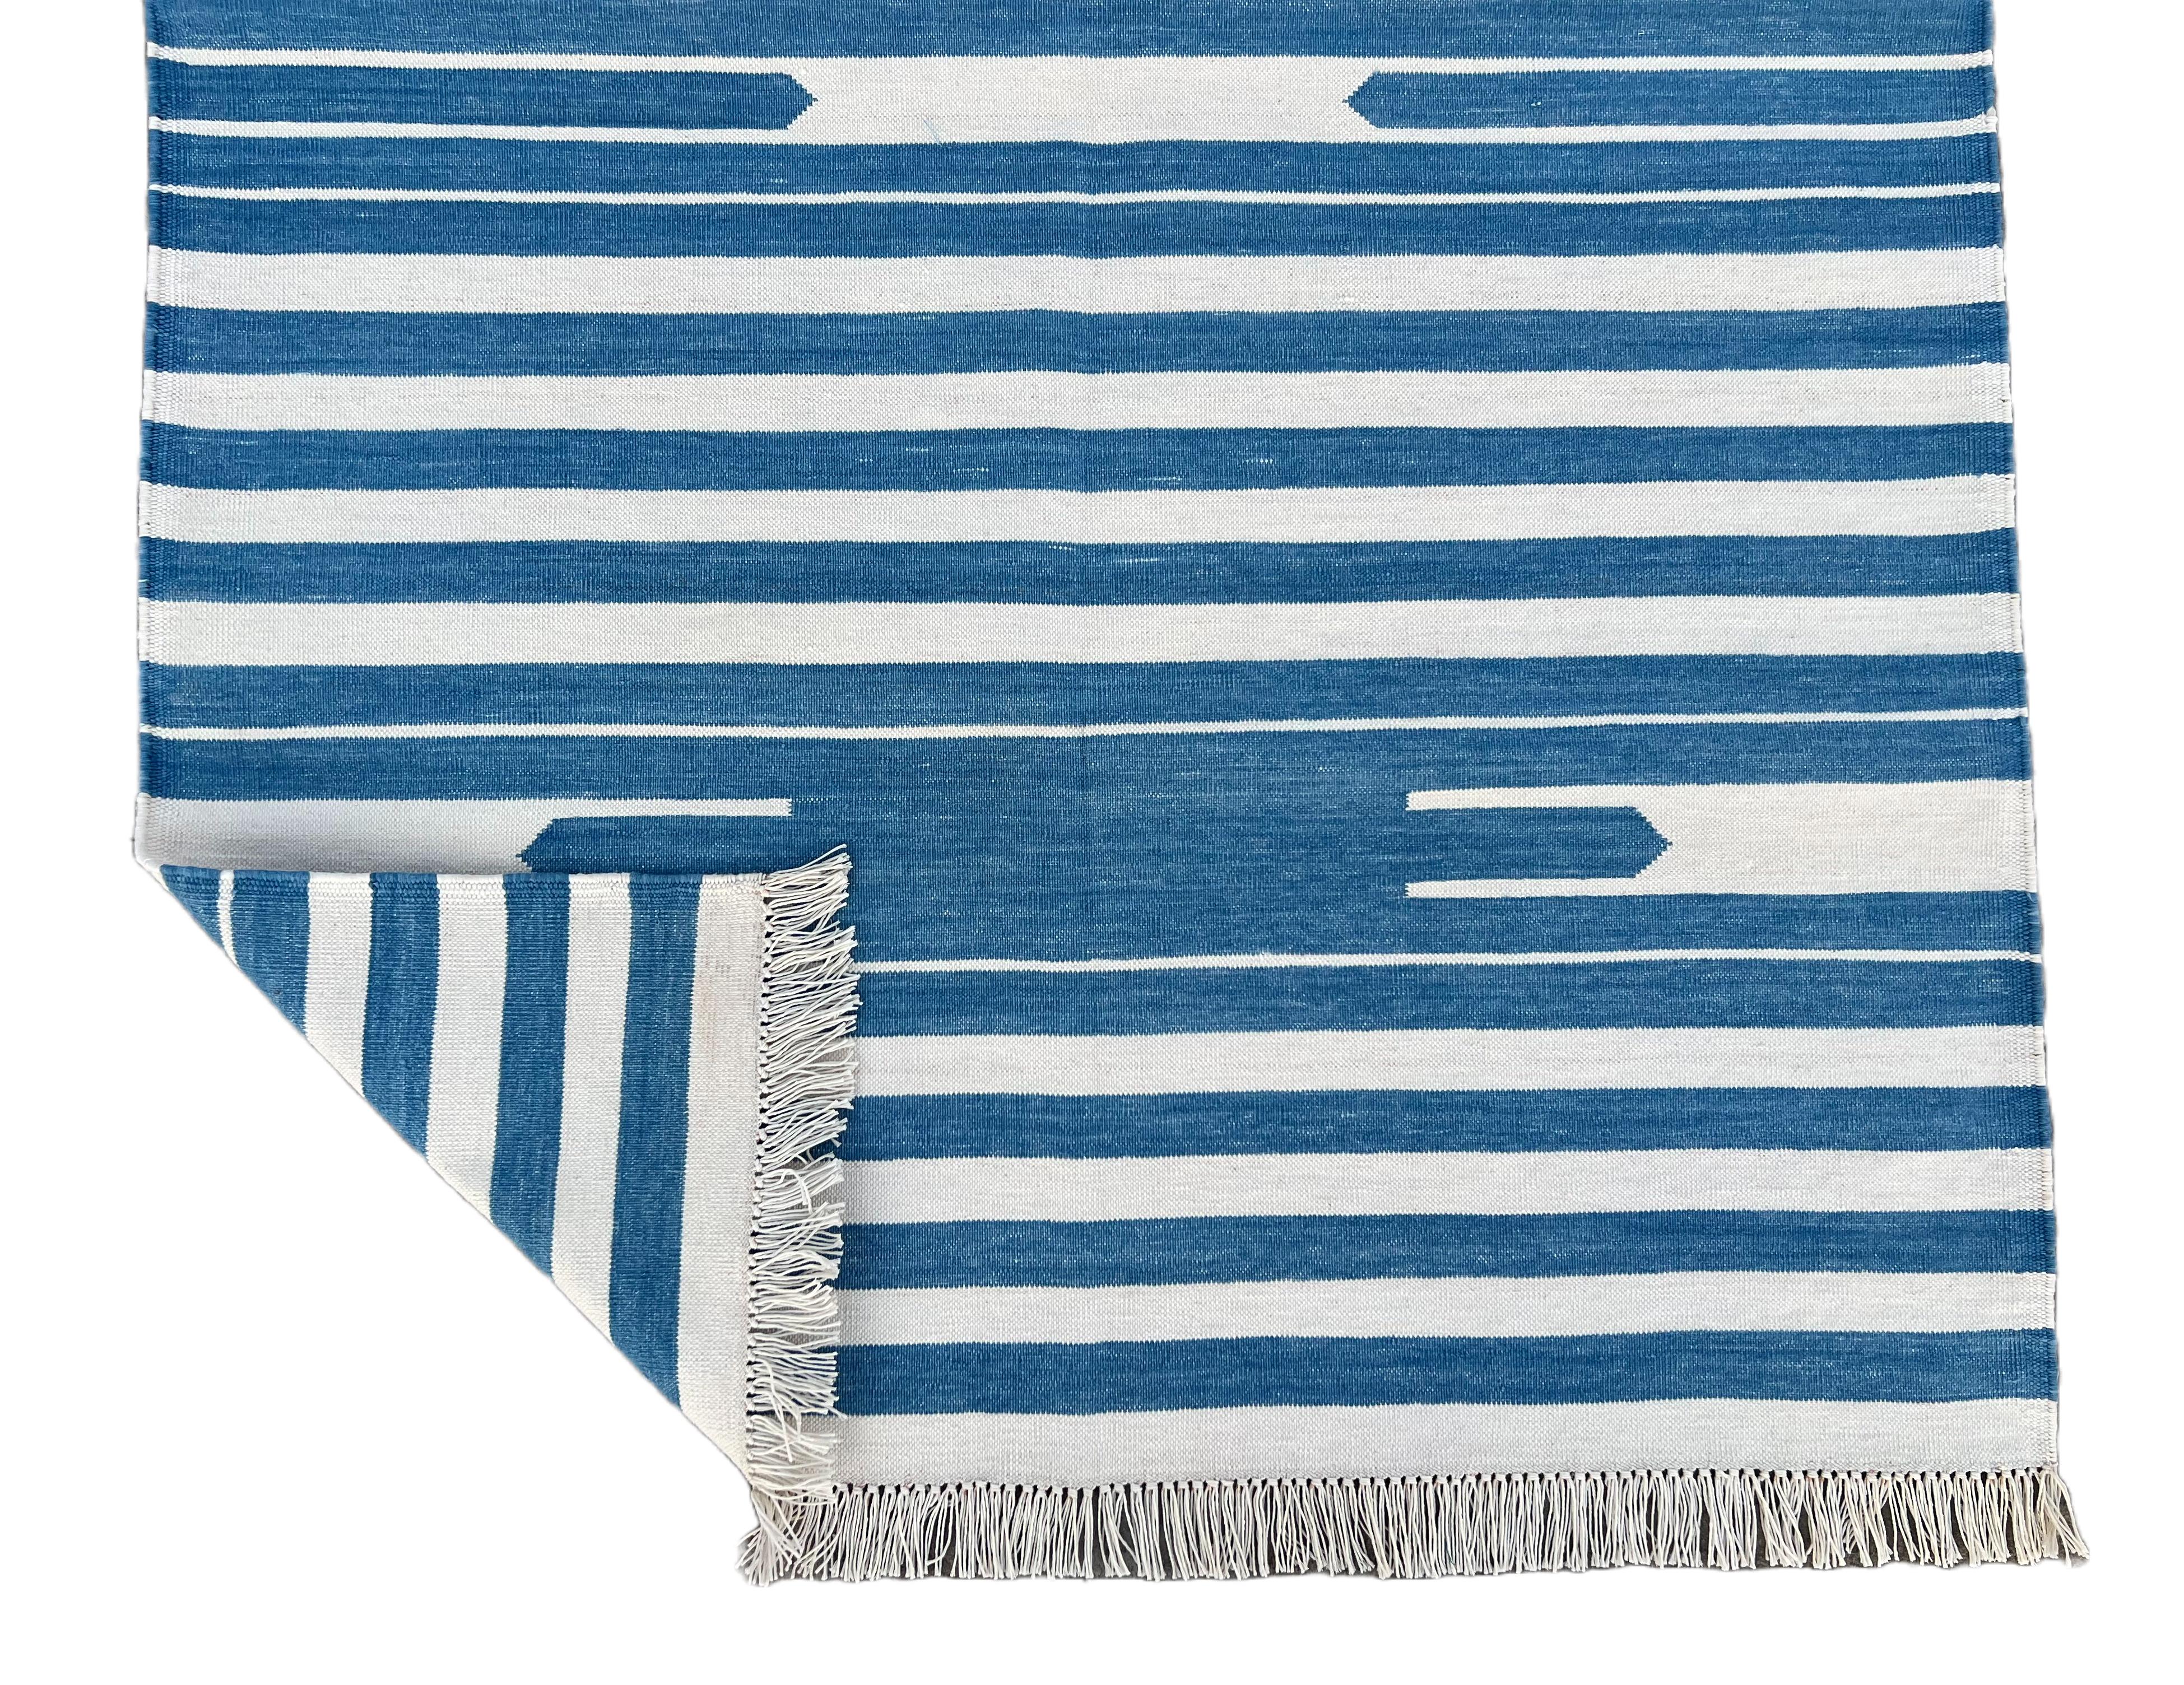 Handmade Cotton Area Flat Weave Rug, 3'x5' Blue And White Striped Indian Dhurrie For Sale 1